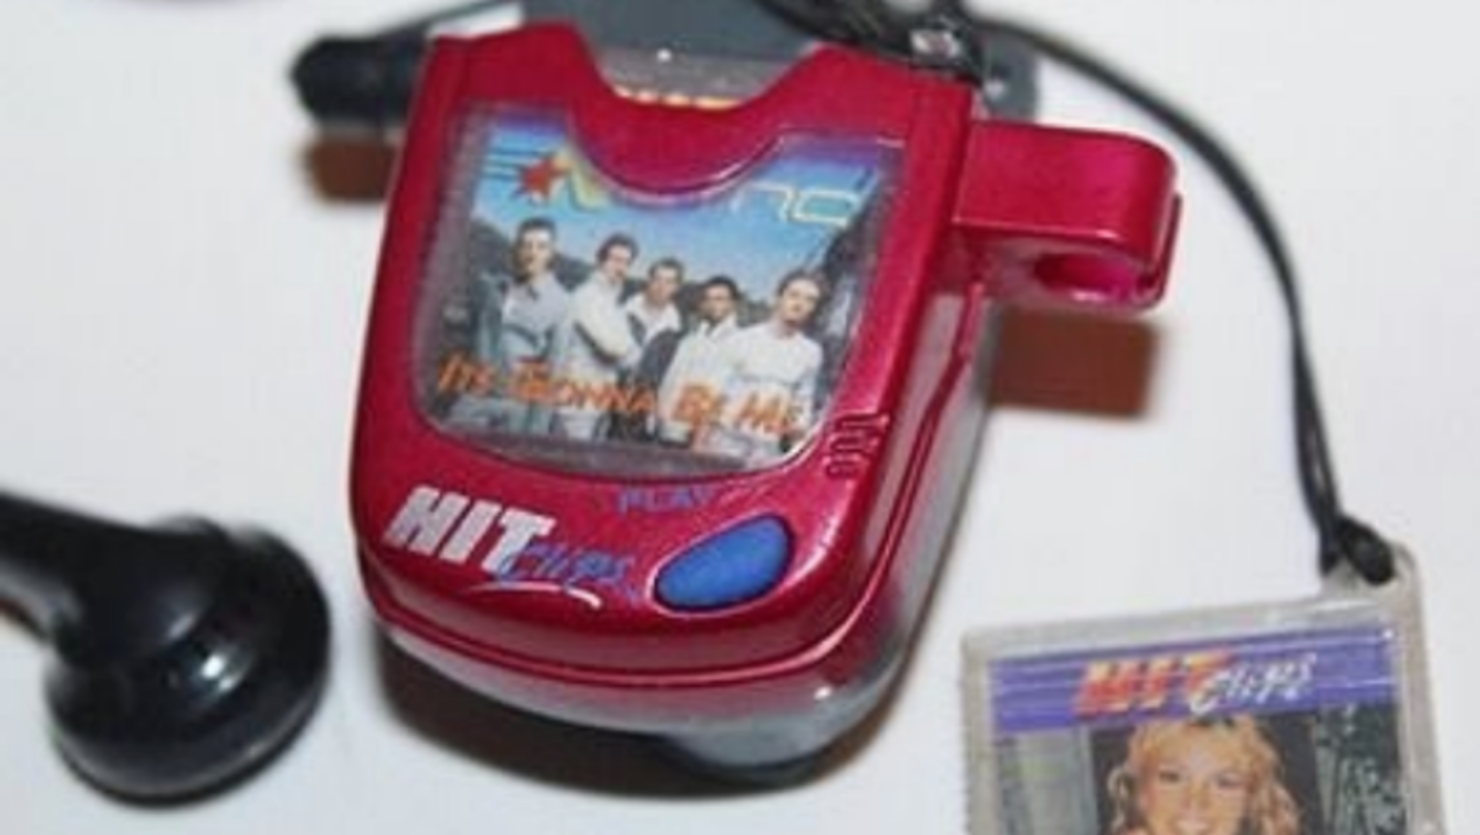 Hit Clips Didn't Make Any Sense But They Paved The Way For The